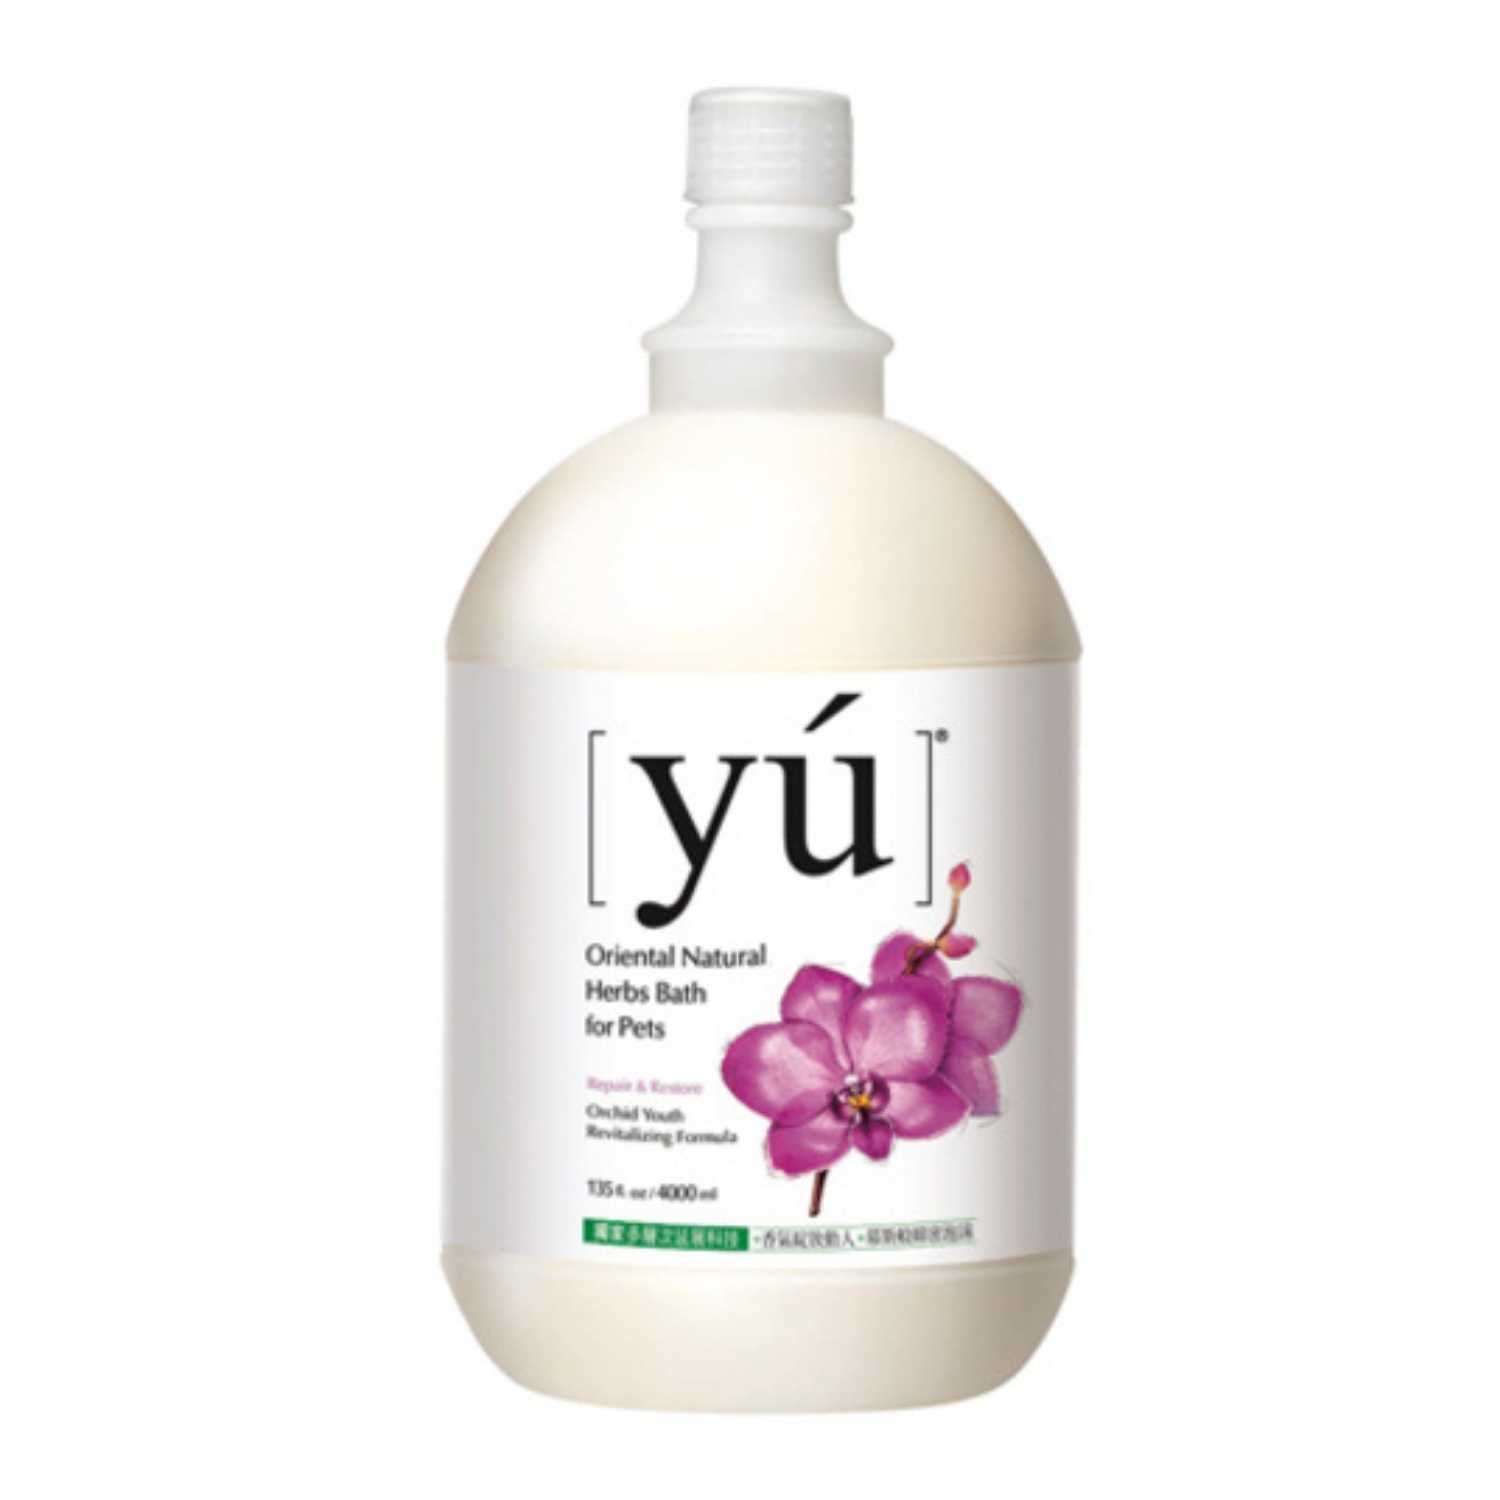 YU - Orchid Youth Revitalizing Formula for Dogs & Cats Bath (2 Sizes)